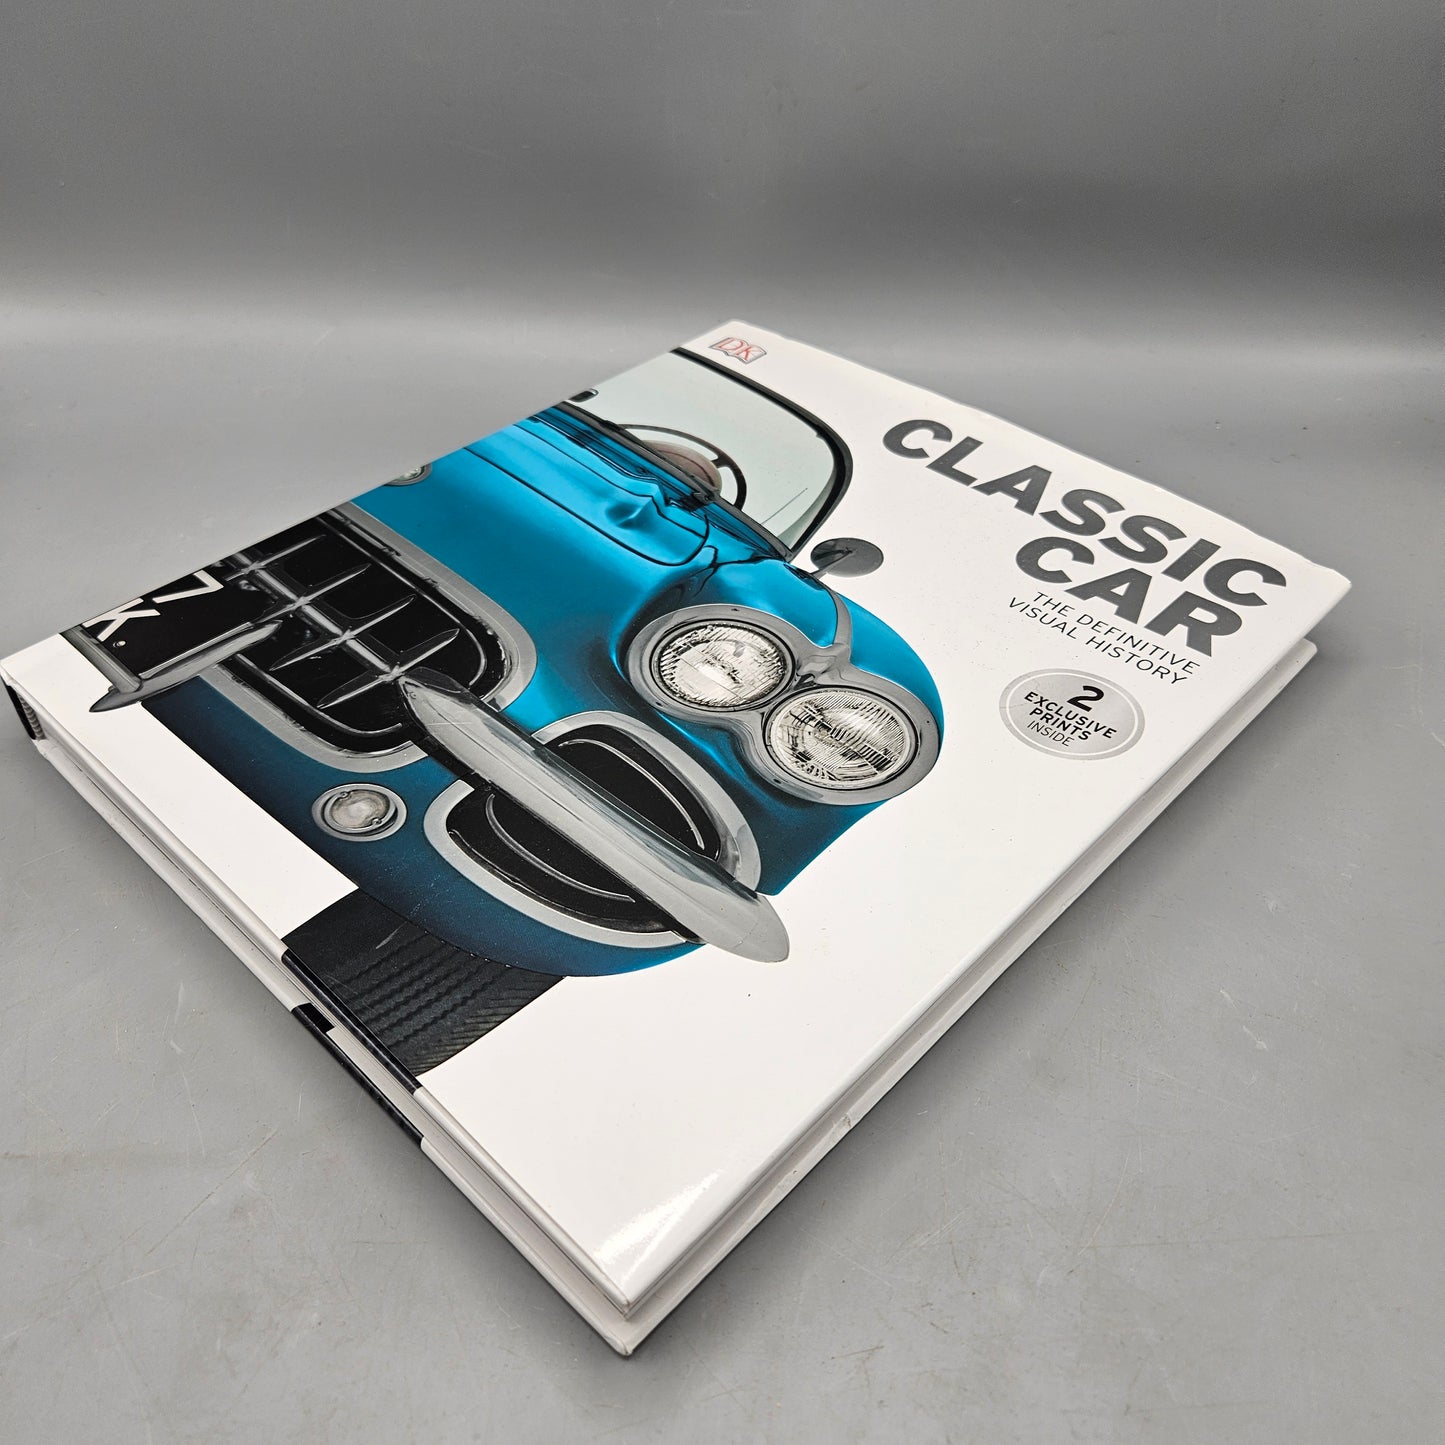 Book: Classic Car: The Definitive Visual History - Hardcover By DK